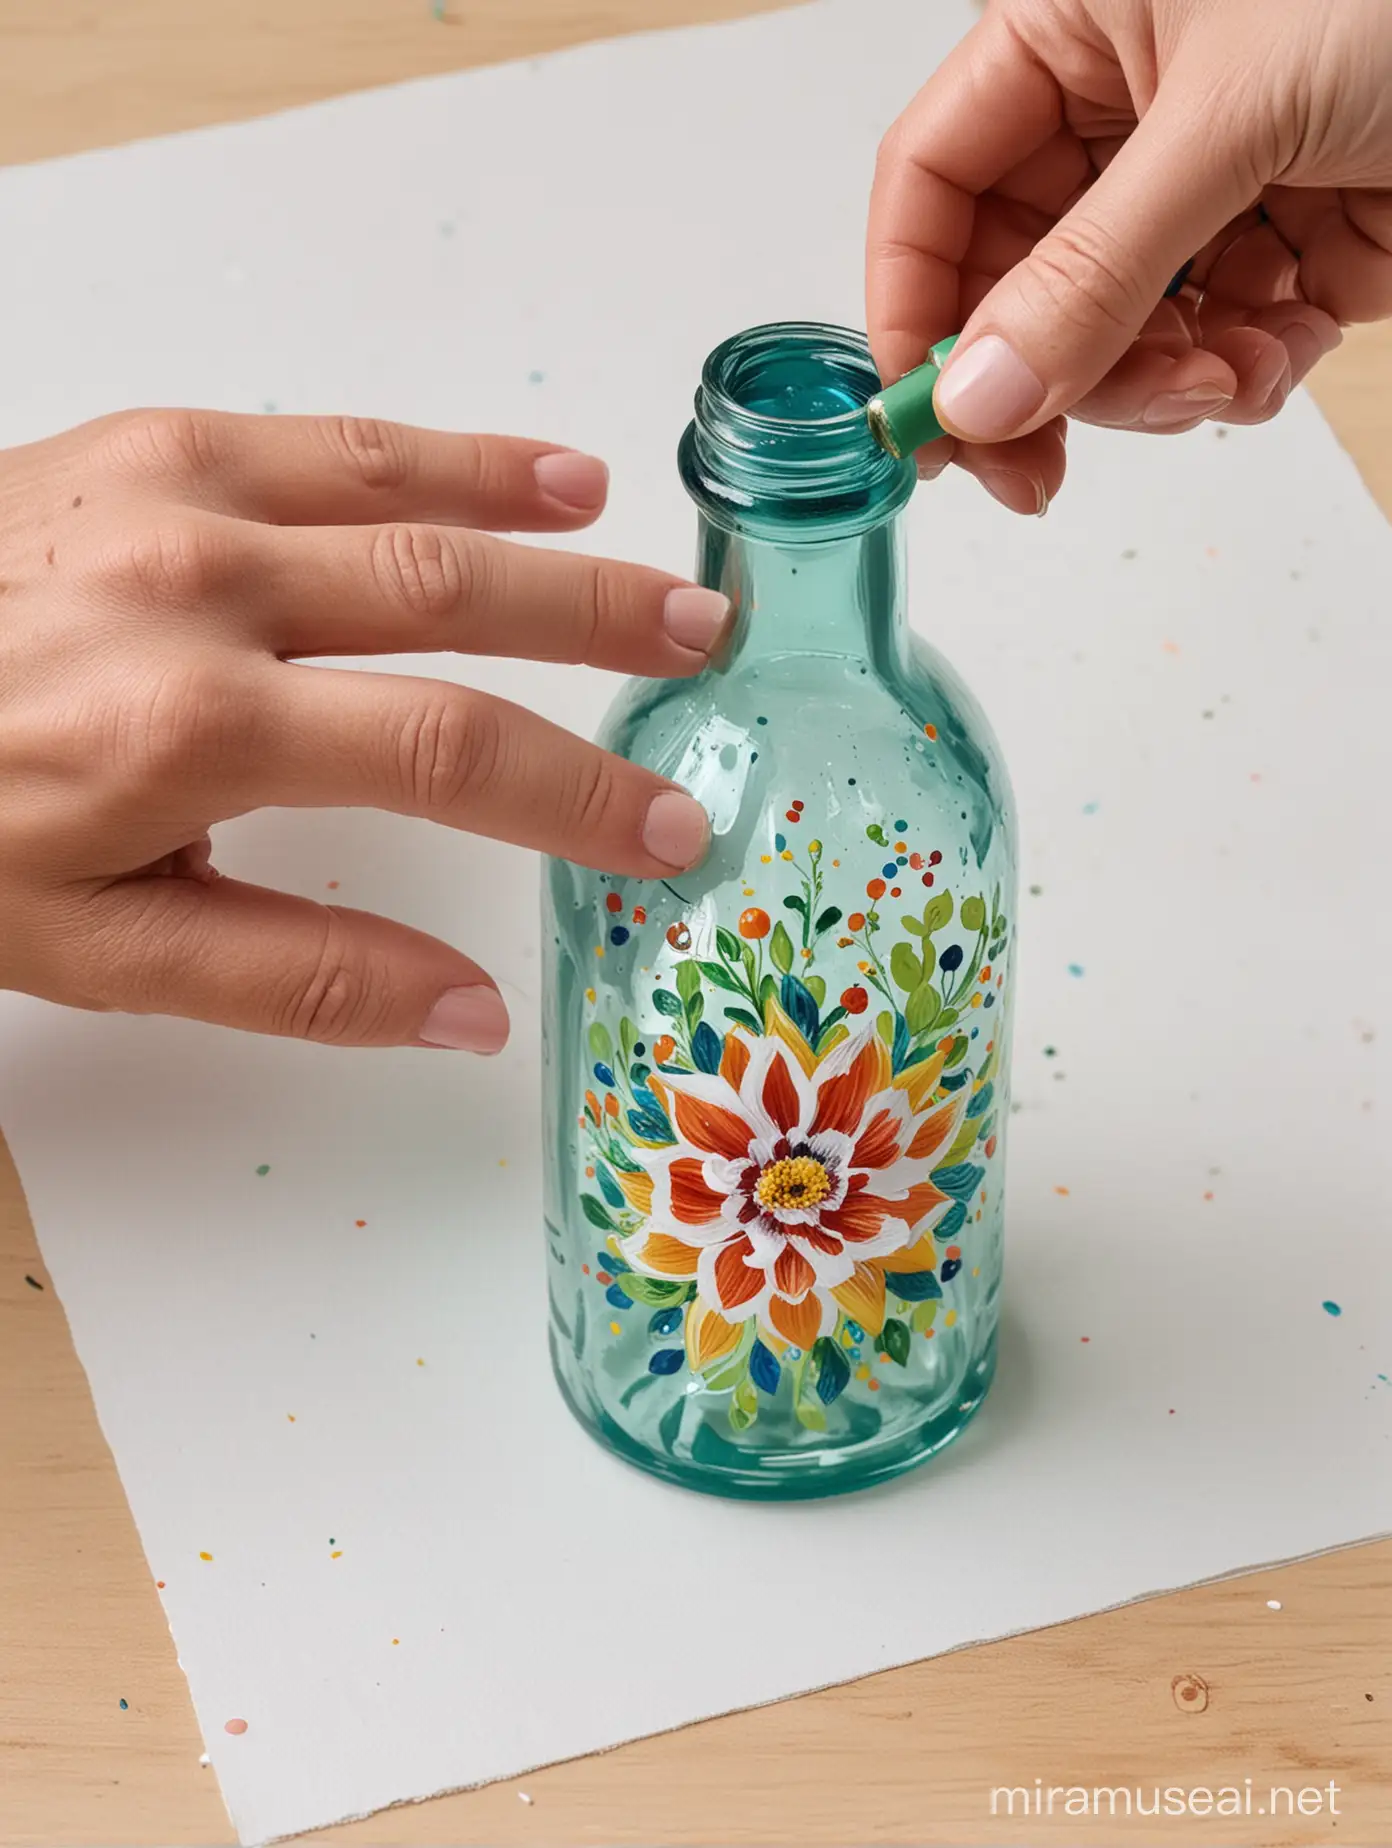 Artist Hand Painting Glass Bottle with Vibrant Acrylic Colors